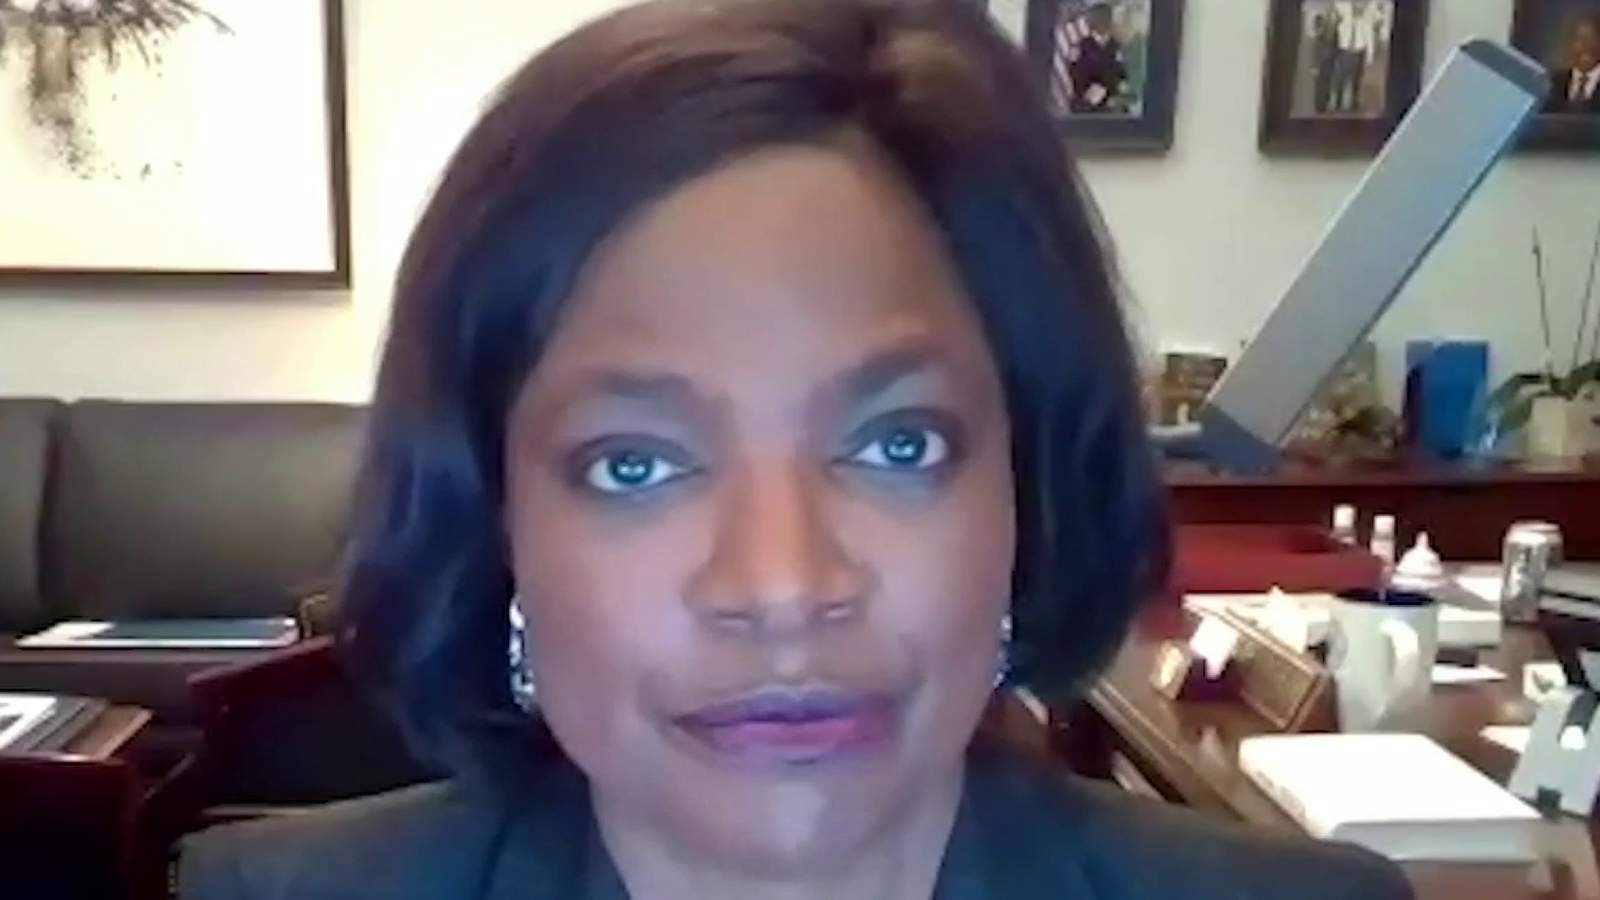 Rep. Val Demings says she went into police mode during capitol evacuation